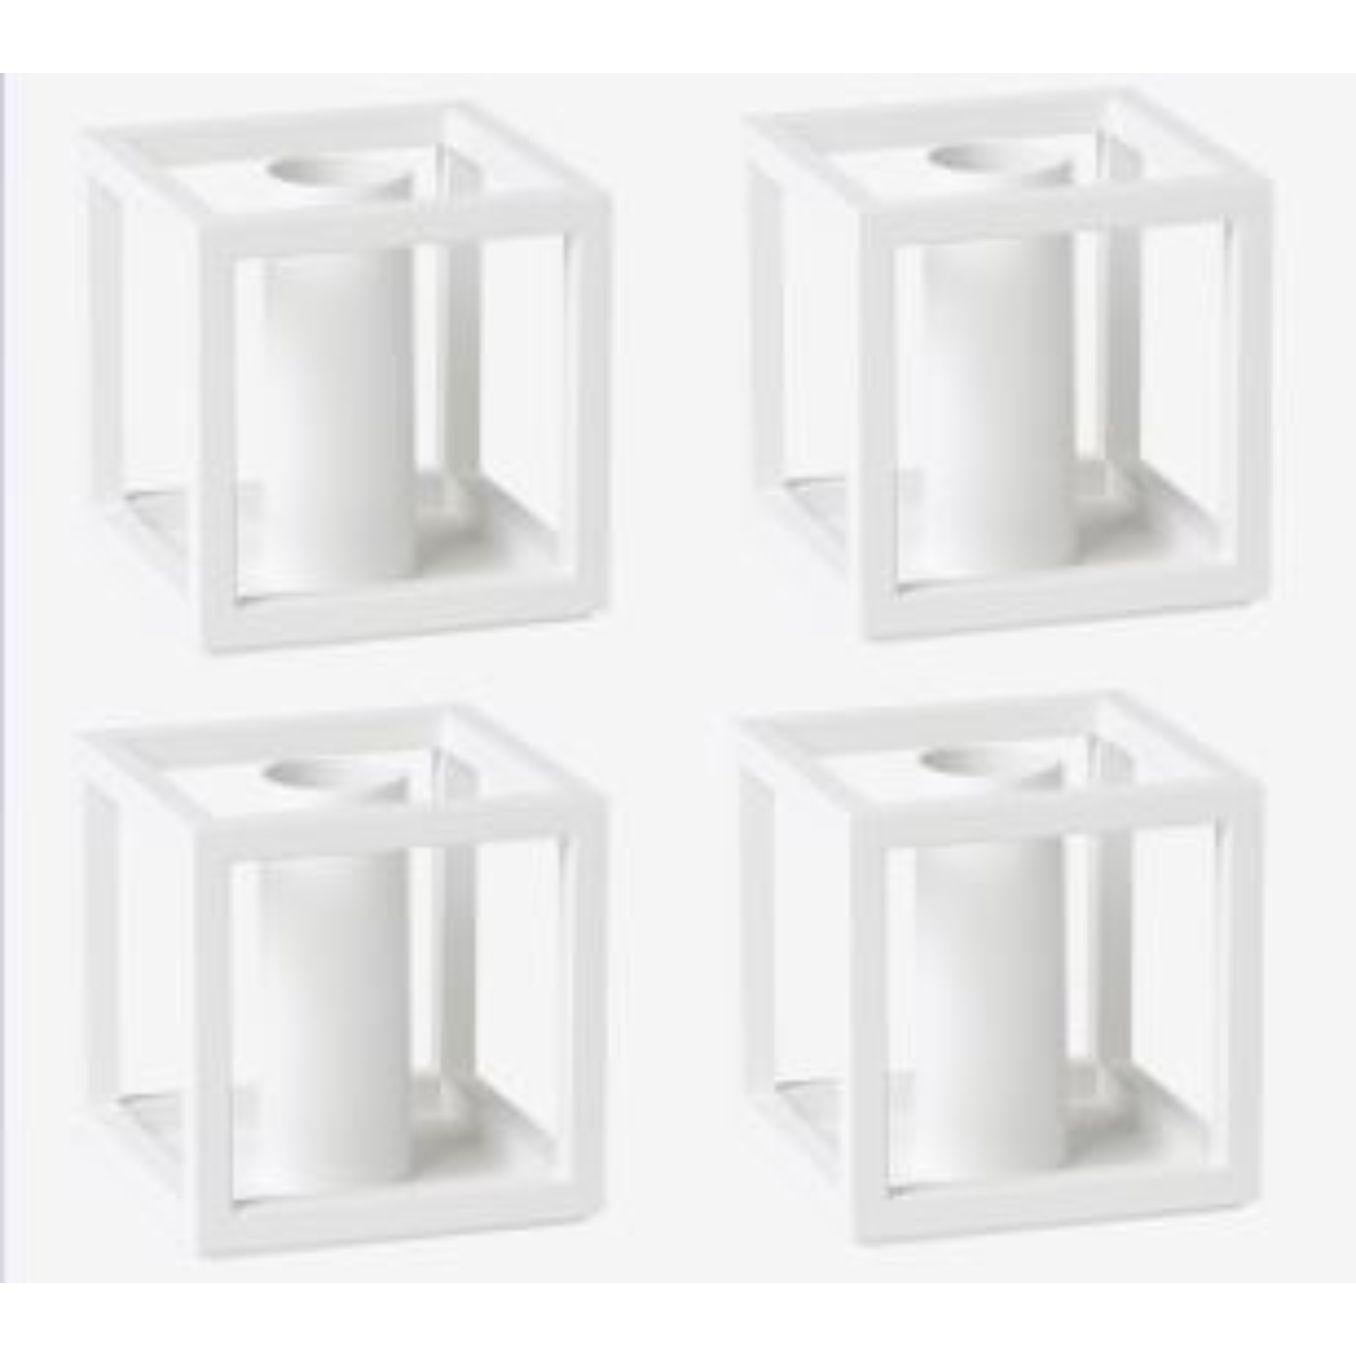 Set of 4 white Kubus T candle holders by Lassen
Dimensions: D 7 x W 7 x H 7 cm 
Materials: Metal 
Also available in different dimensions and colors. 
Weight: 0.40 Kg

The tealight, Kubus T, is added to the Kubus collection in 2018, designed by